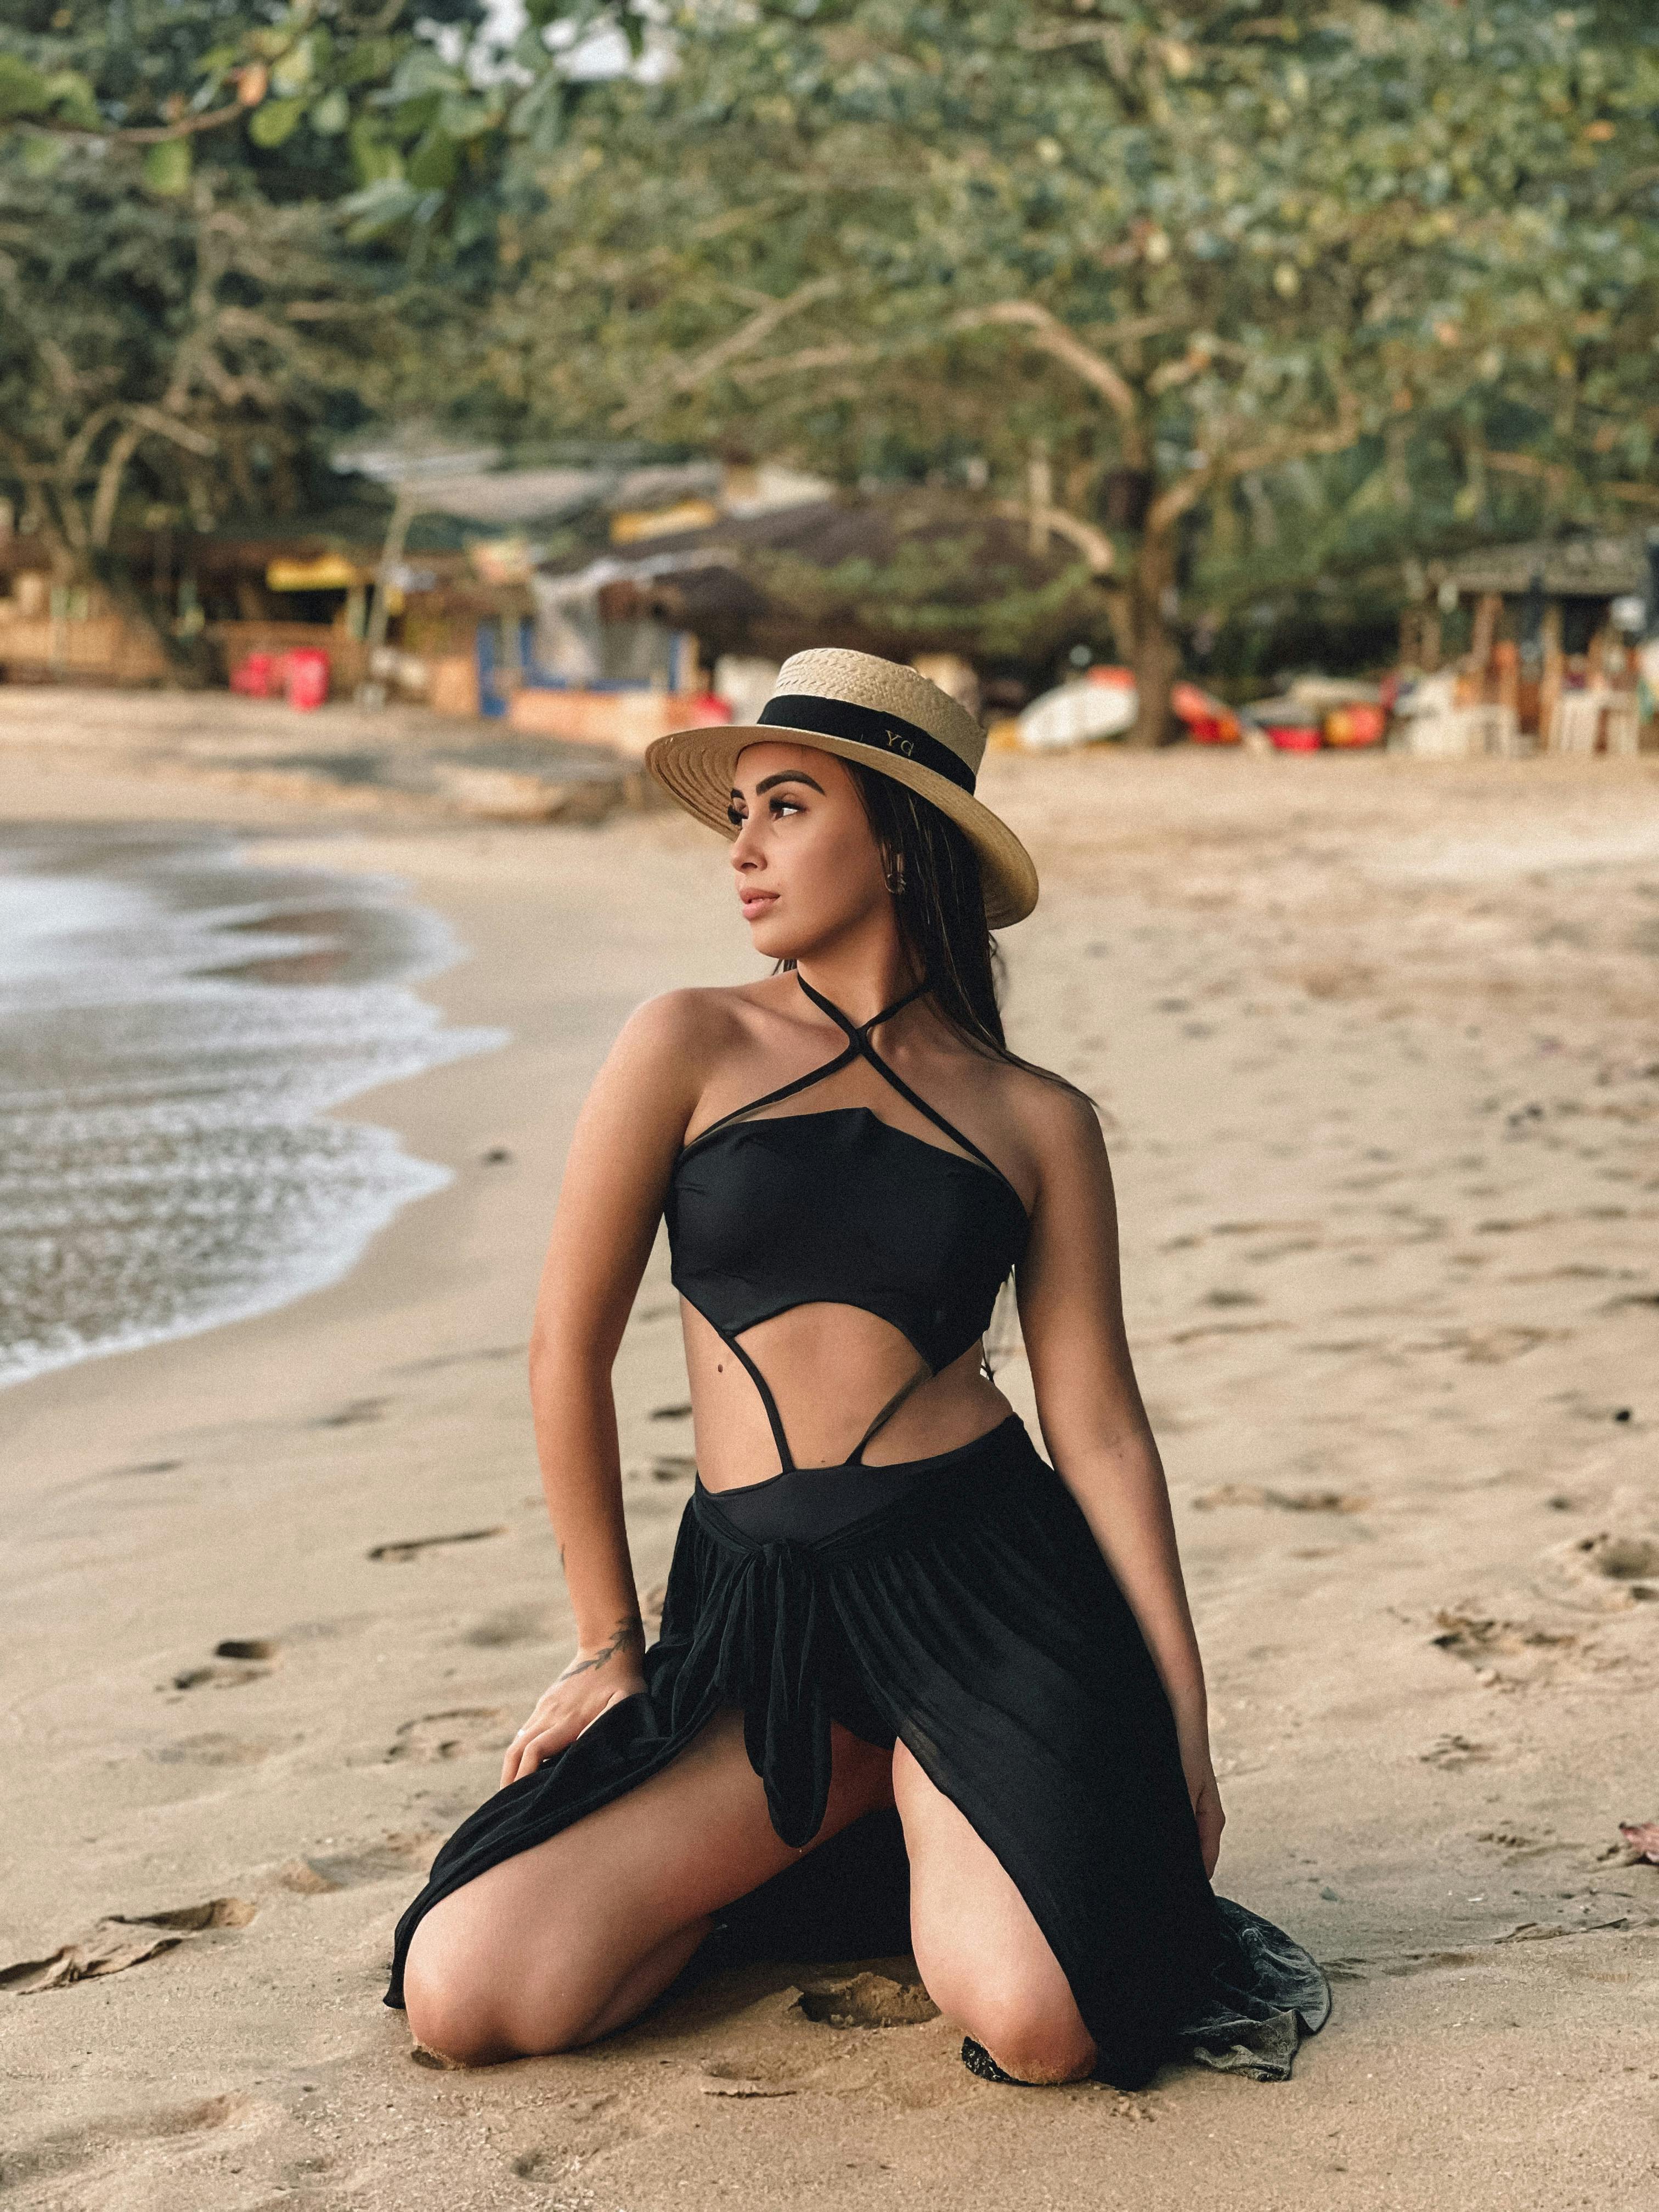 5 Beach Photography Tips for a Glamor Shoot | Get Your Best Shots